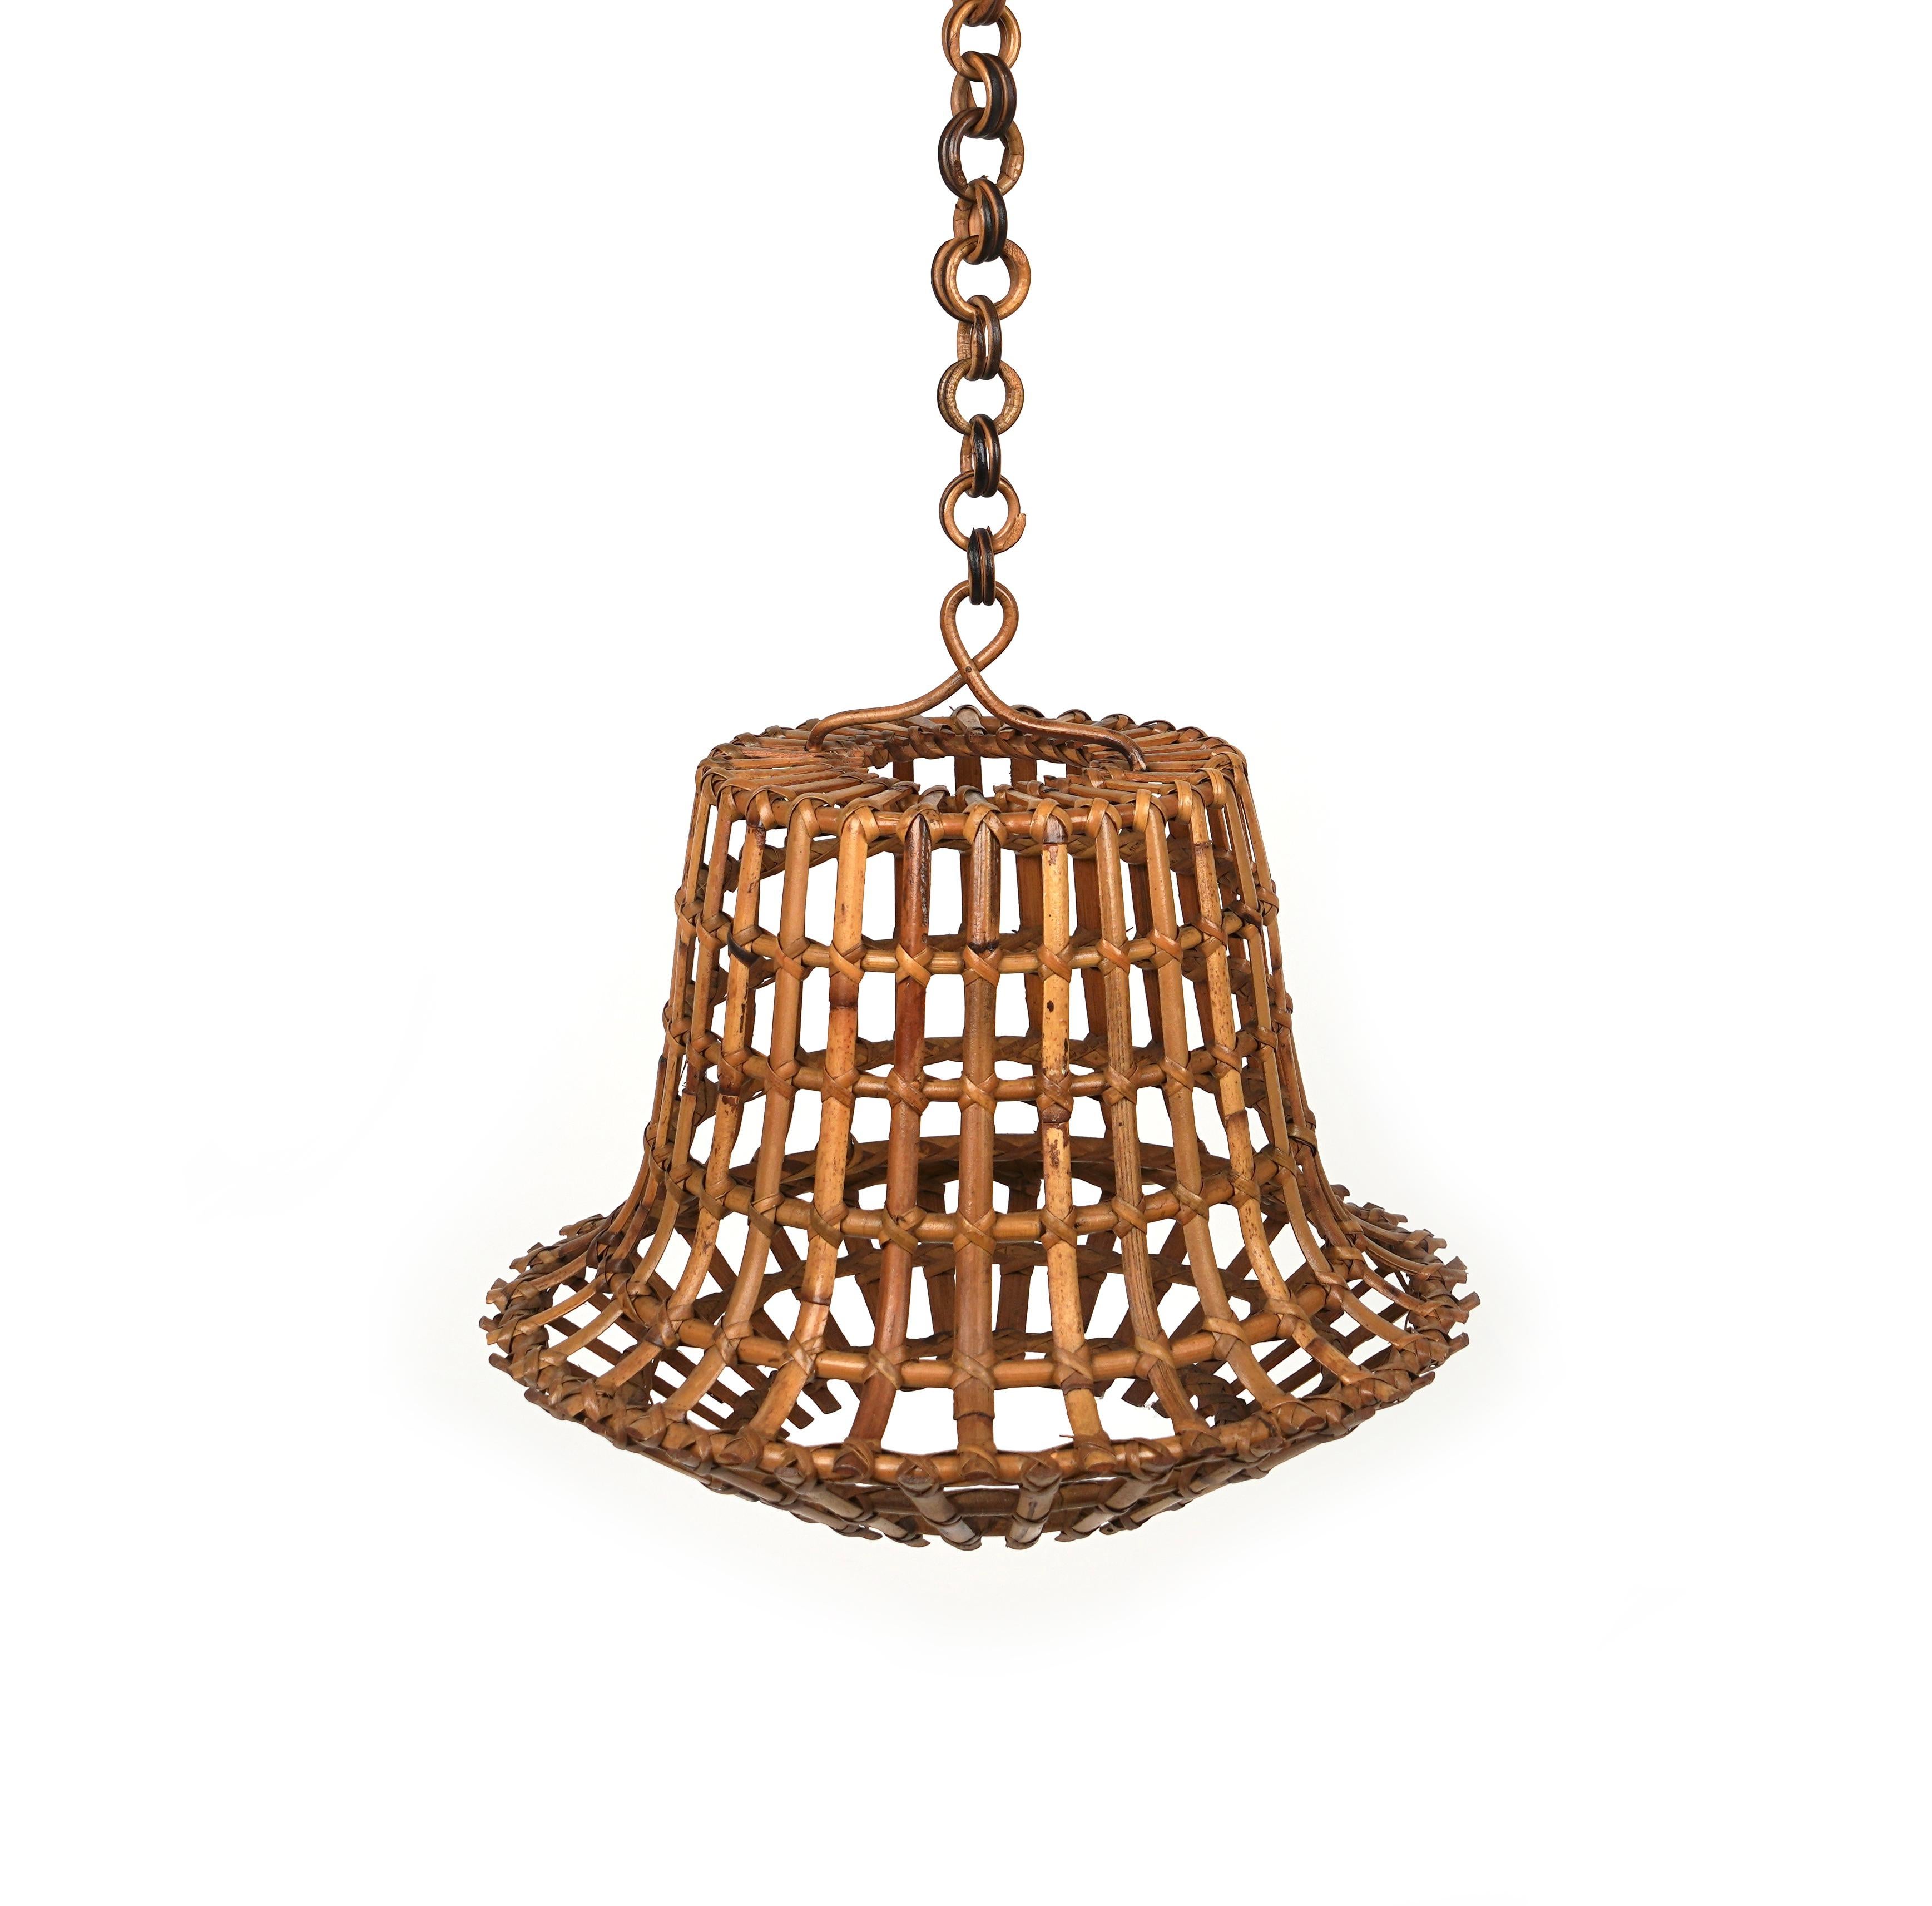 Italian Midcentury Bamboo and Rattan Chandelier Louis Sognot Style, Italy 1960s For Sale